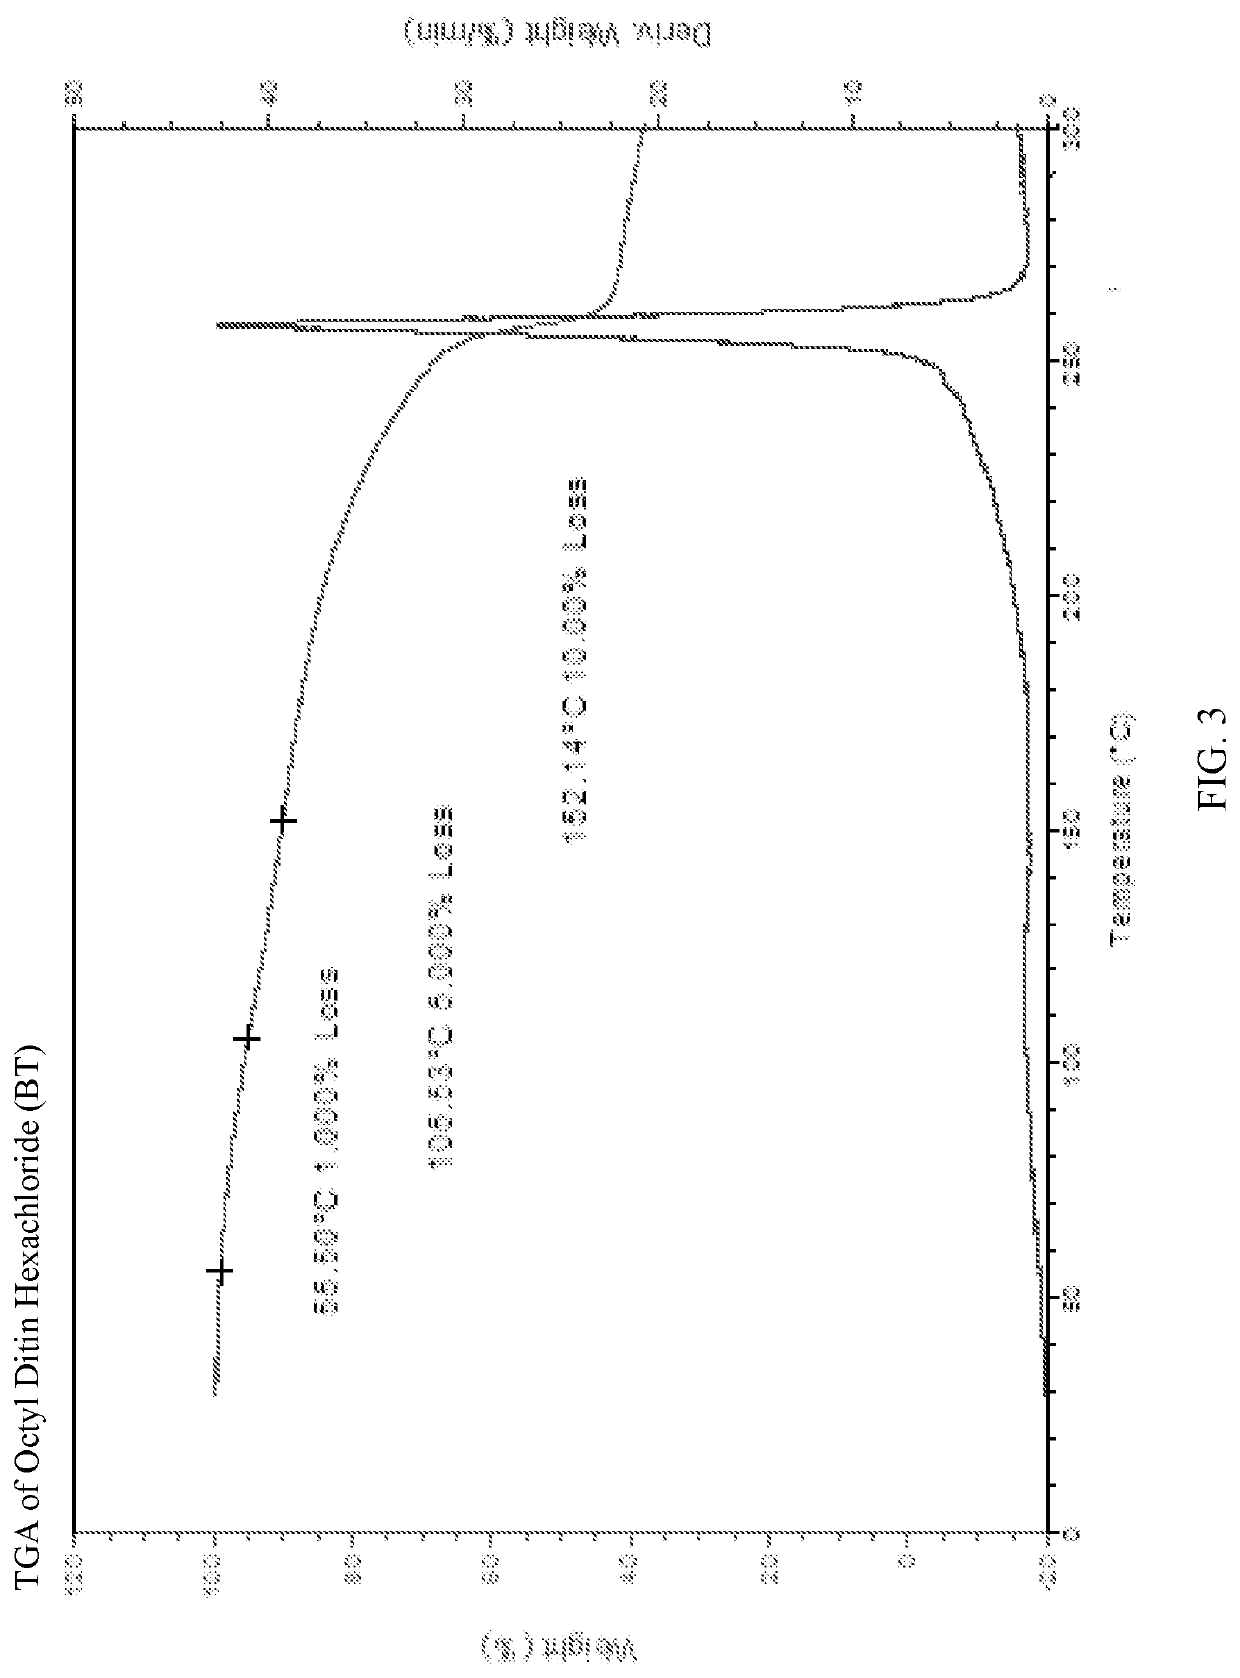 Alkyl-bridged tin-based thermal stabilizers for halogenated resins and synthesis and uses therof